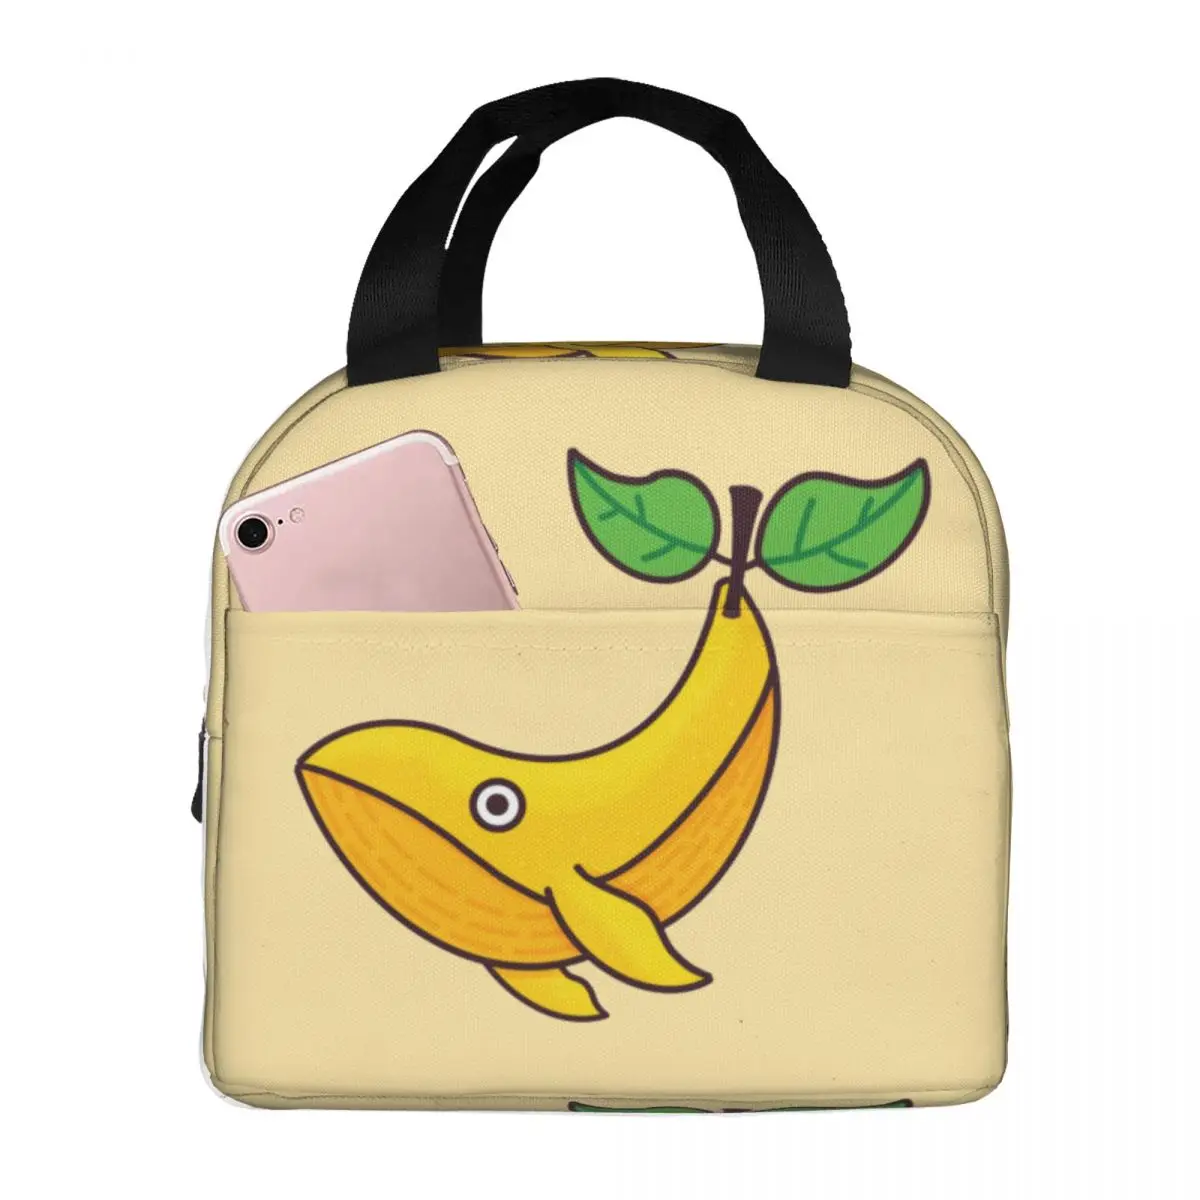 

Mango Whale Lunch Box Merch Portable Insulated Oxford Cooler Bag Thermal Picnic Tote for Women Kids